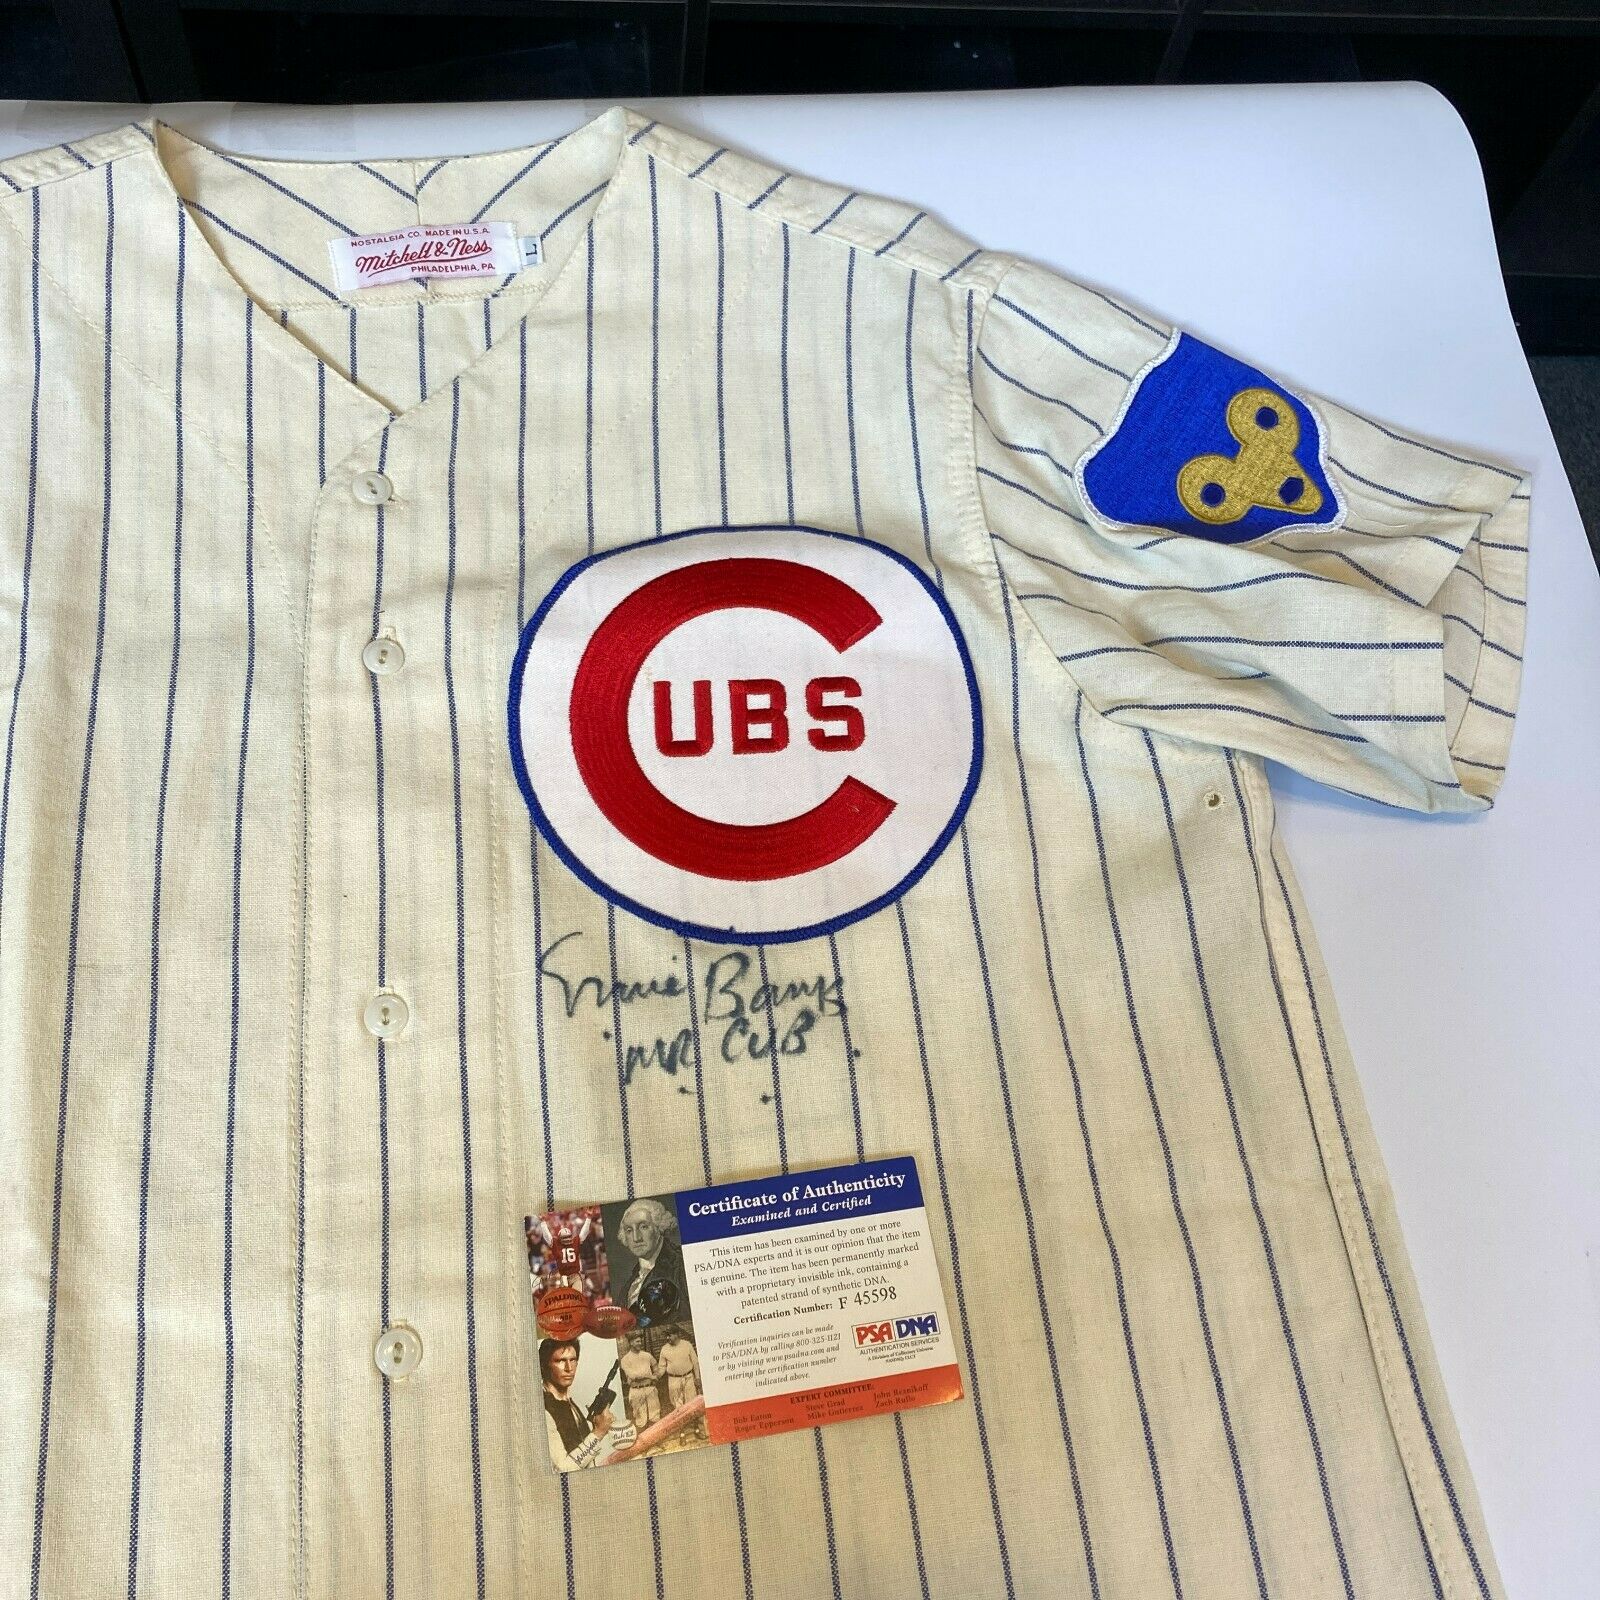 Chicago Cubs Ron Santo 1969 Mitchell & Ness Authentic Home Jersey